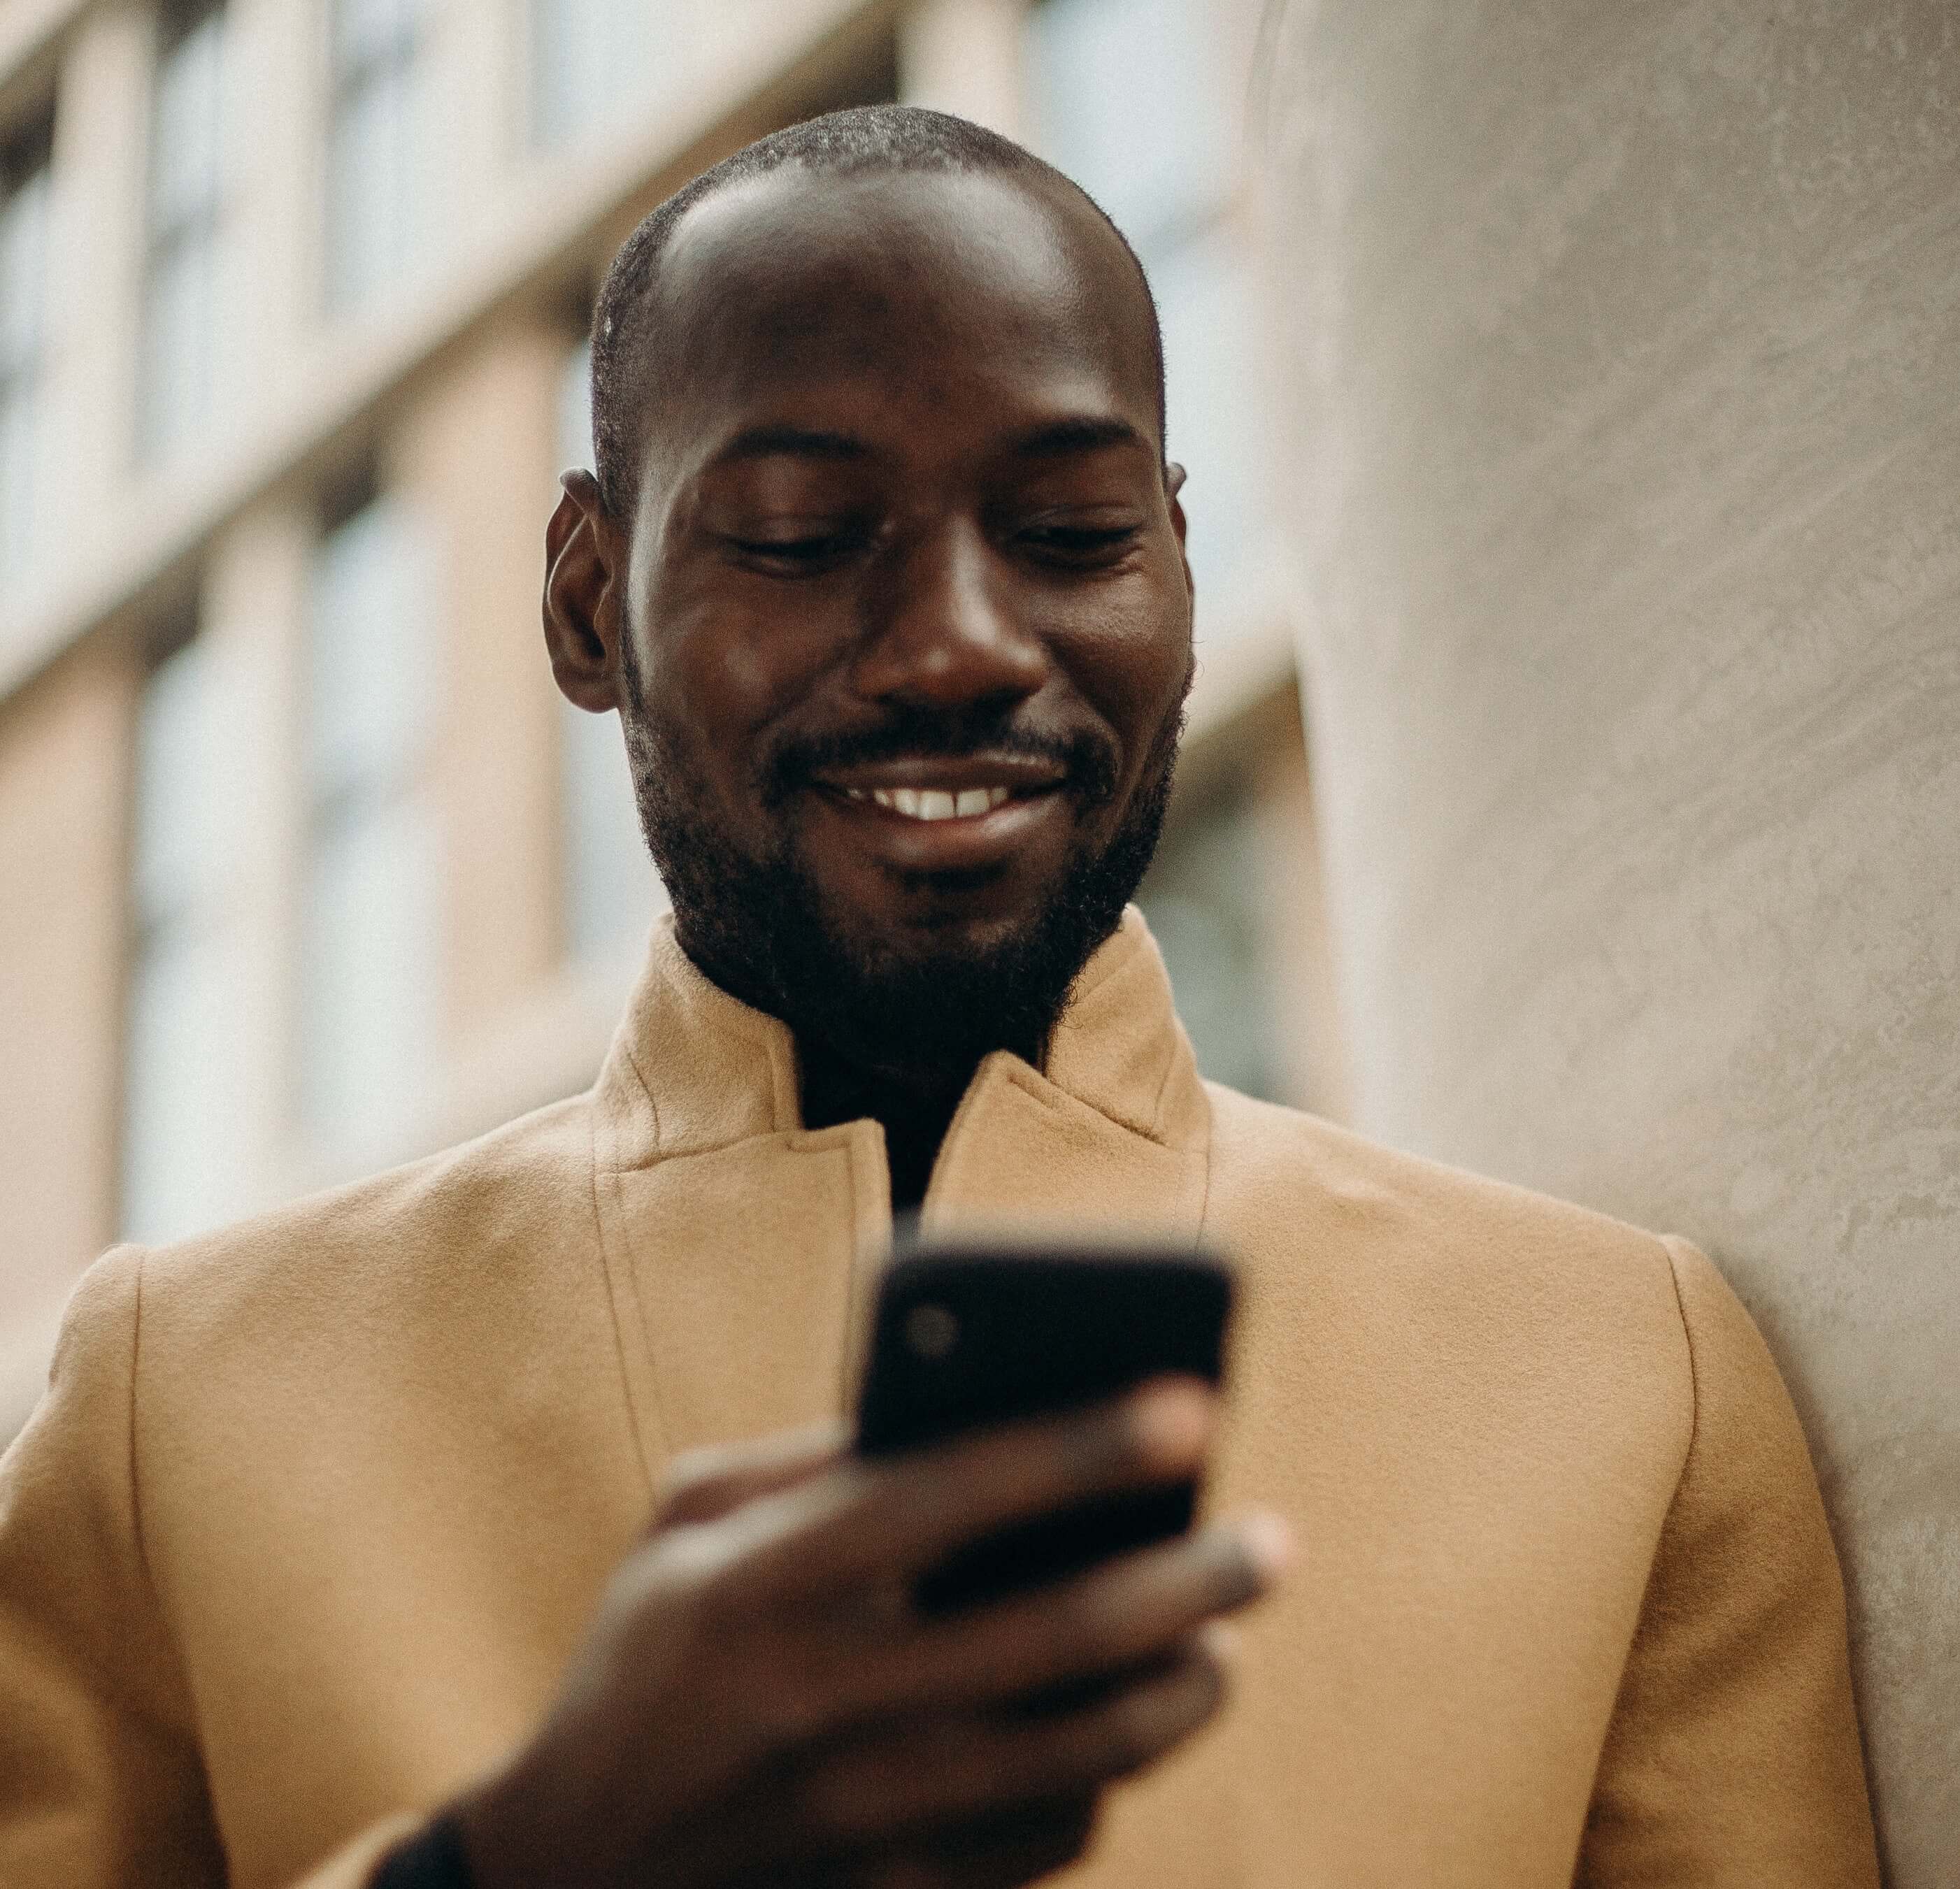 Man smiling and using omnichannel messaging